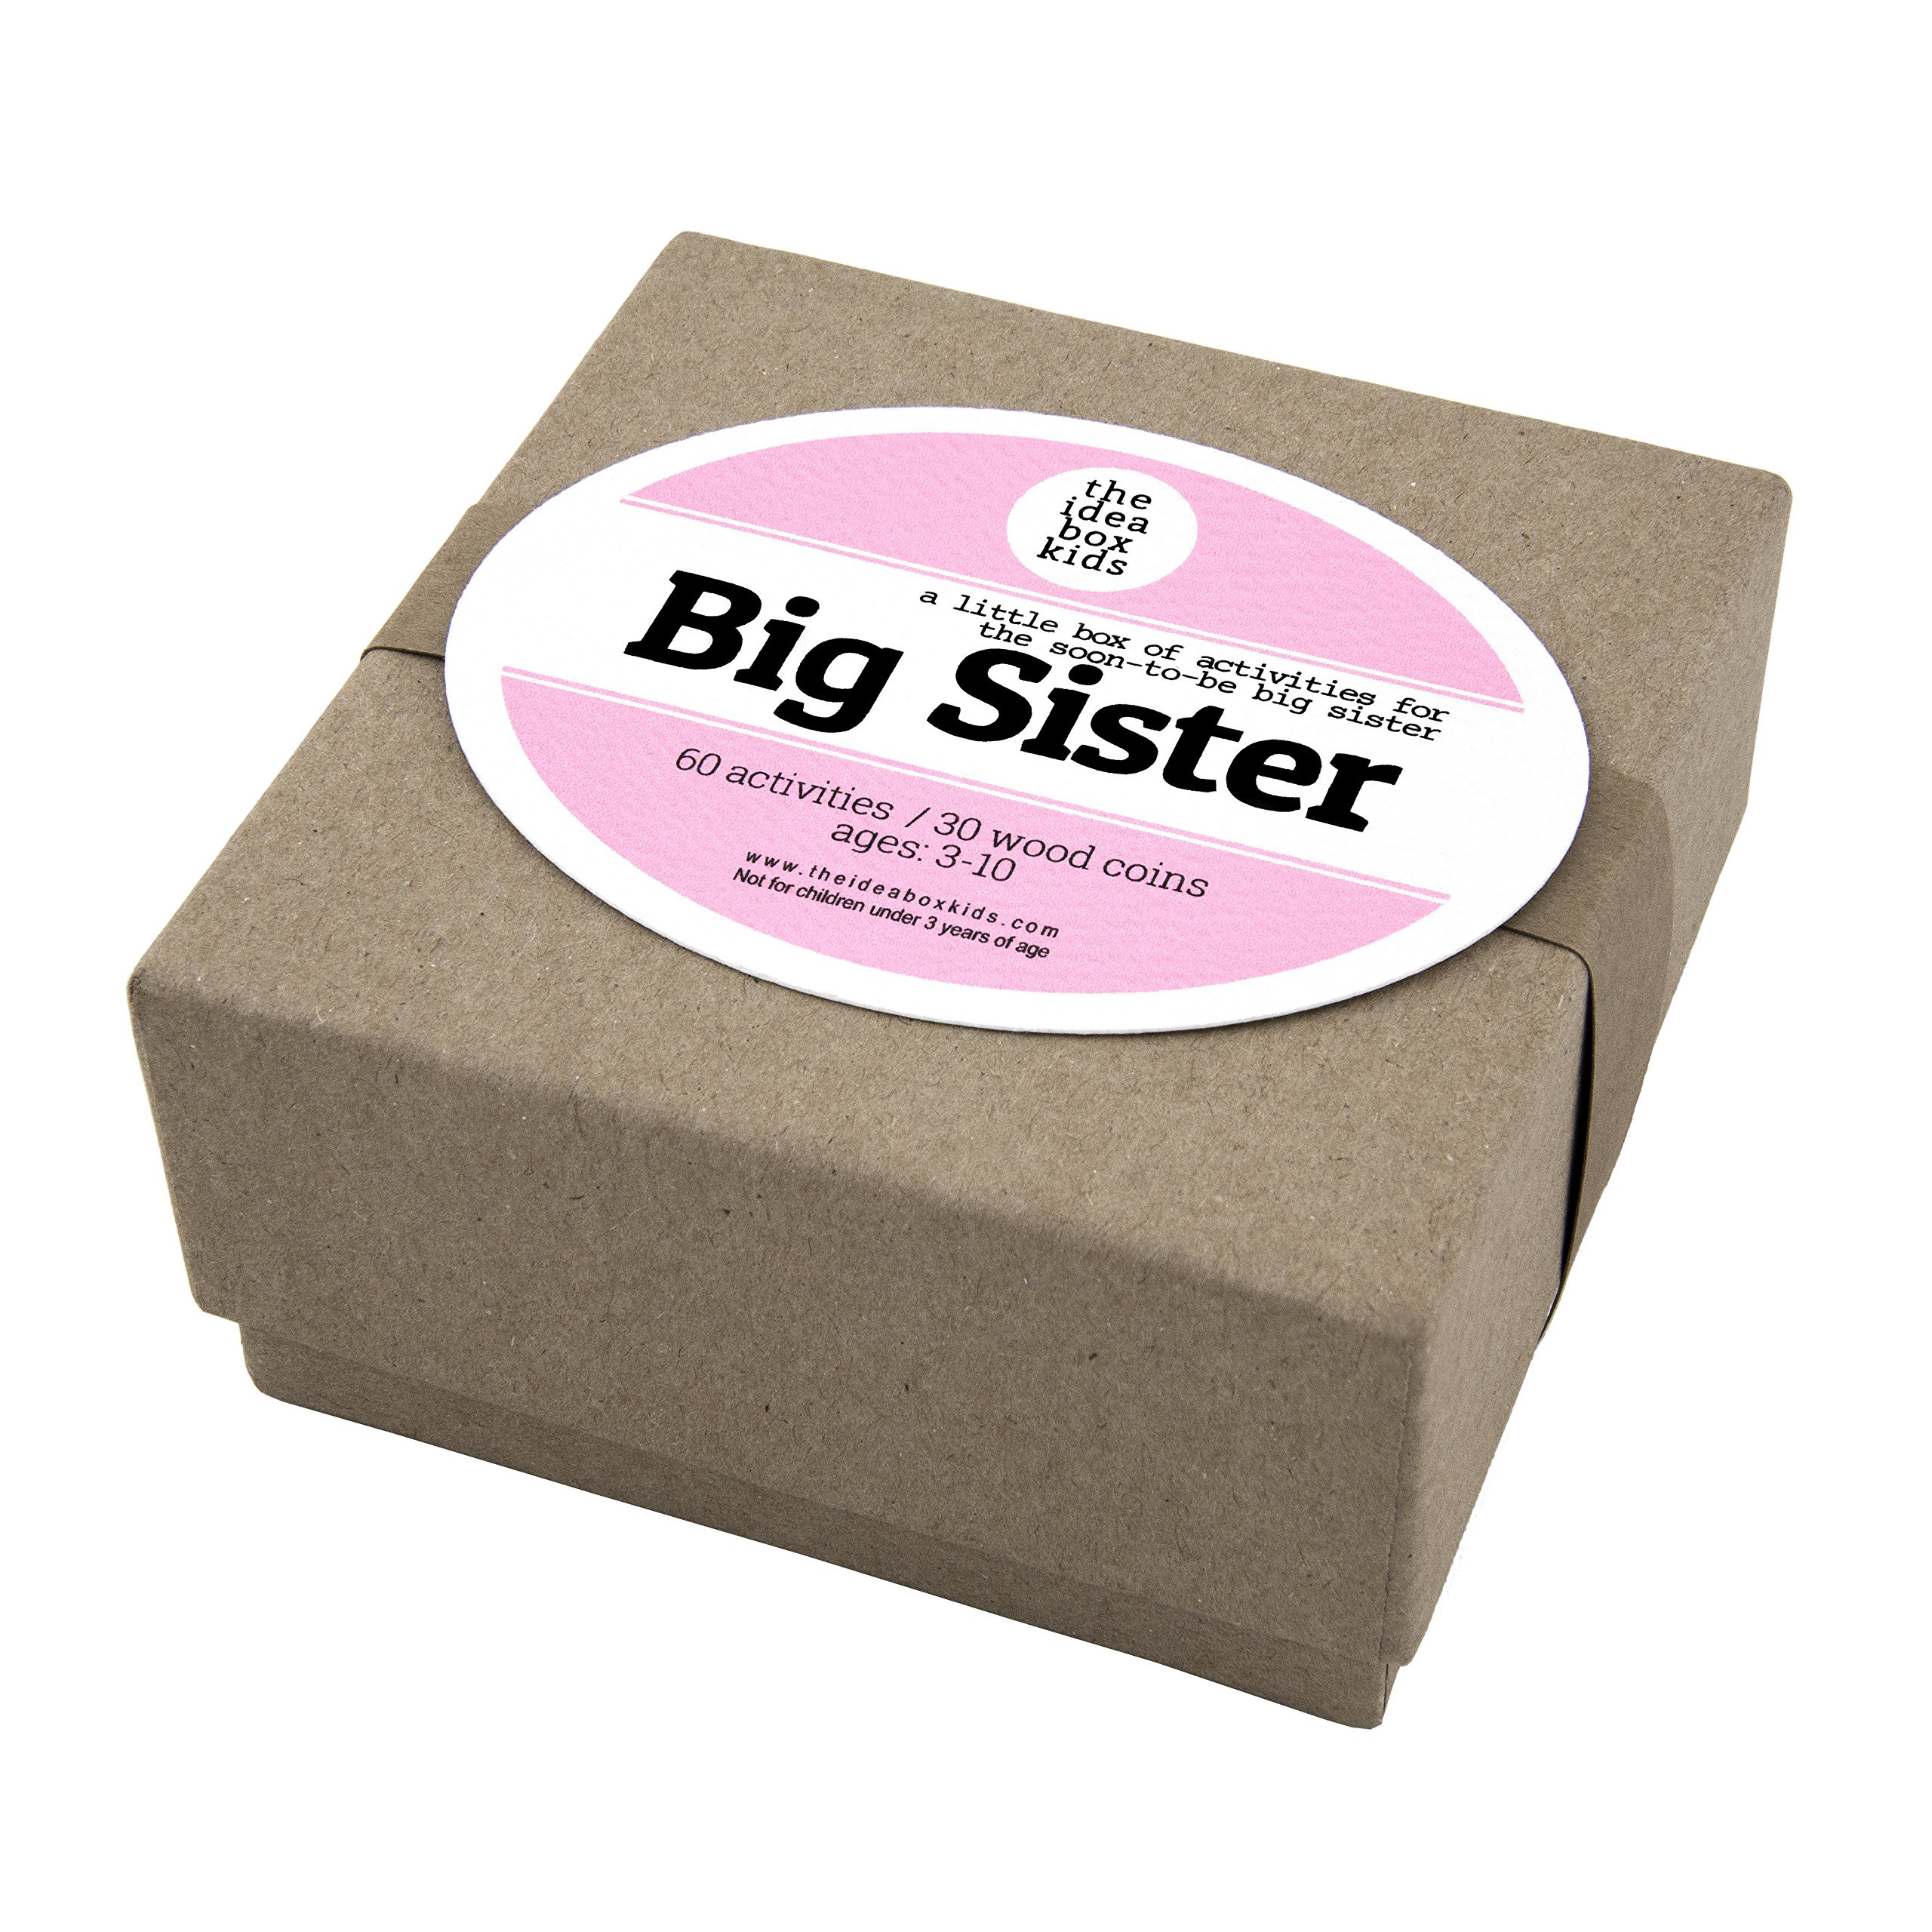 Gift Ideas From Baby To Big Sister
 New Sibling Gifts Amazon